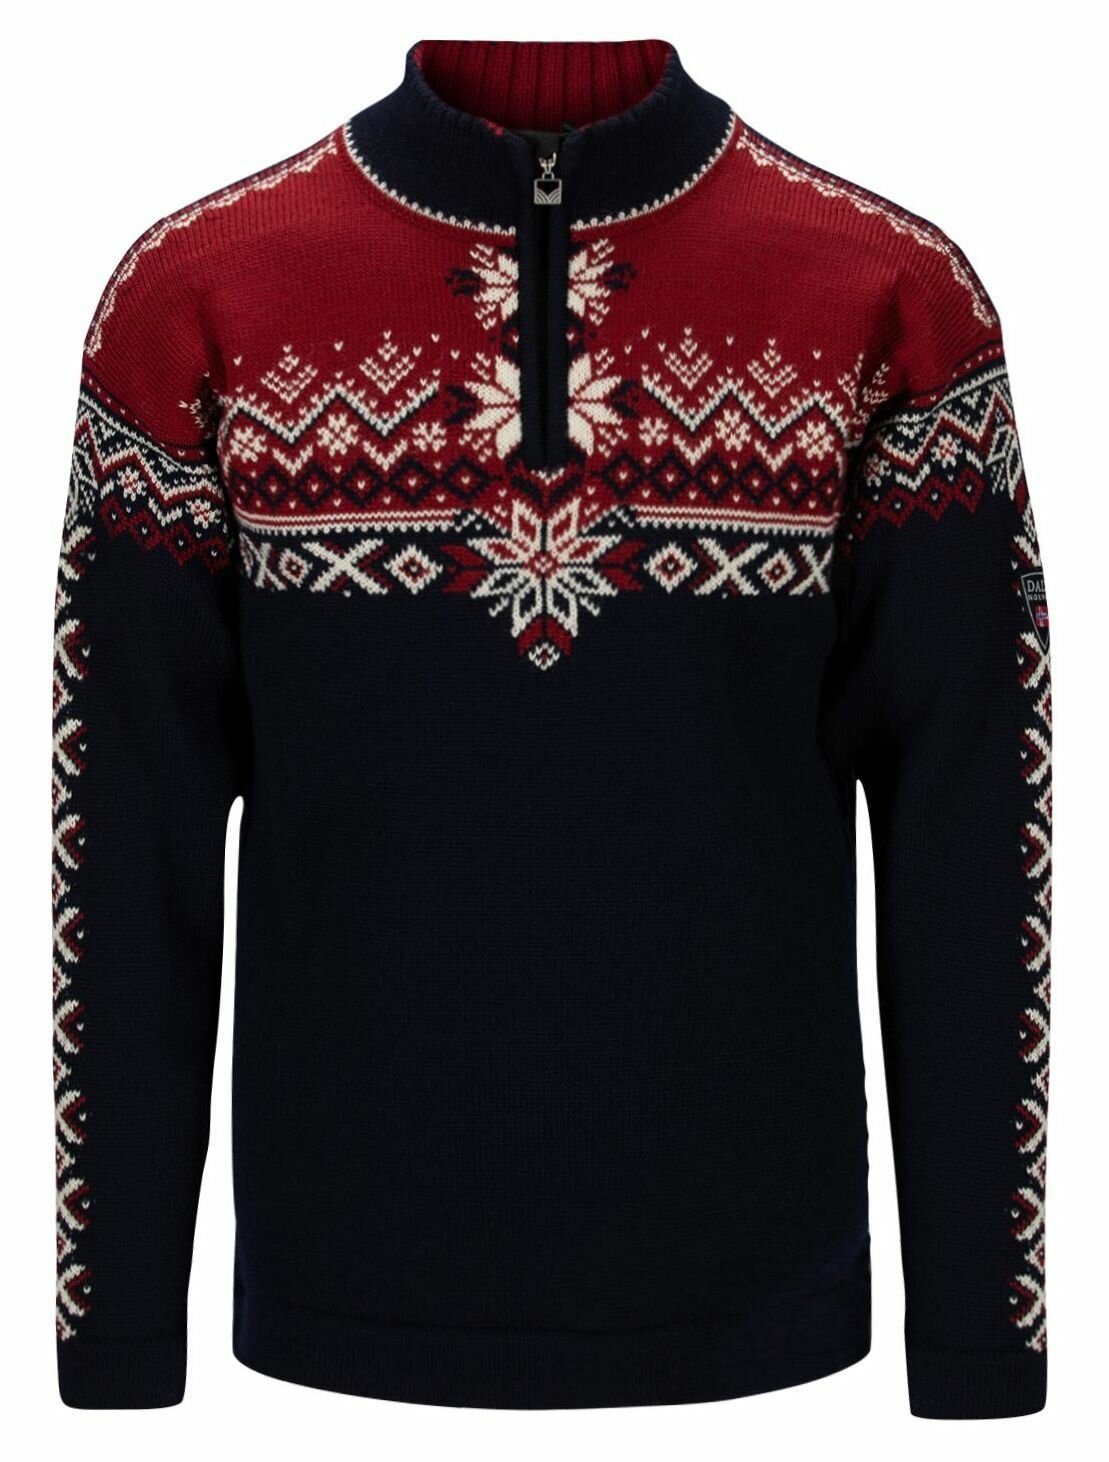 Sweater Norway € COLDSEASON.com, Dale of by 140 Anniversary 289,90 Red/Navy - Mens